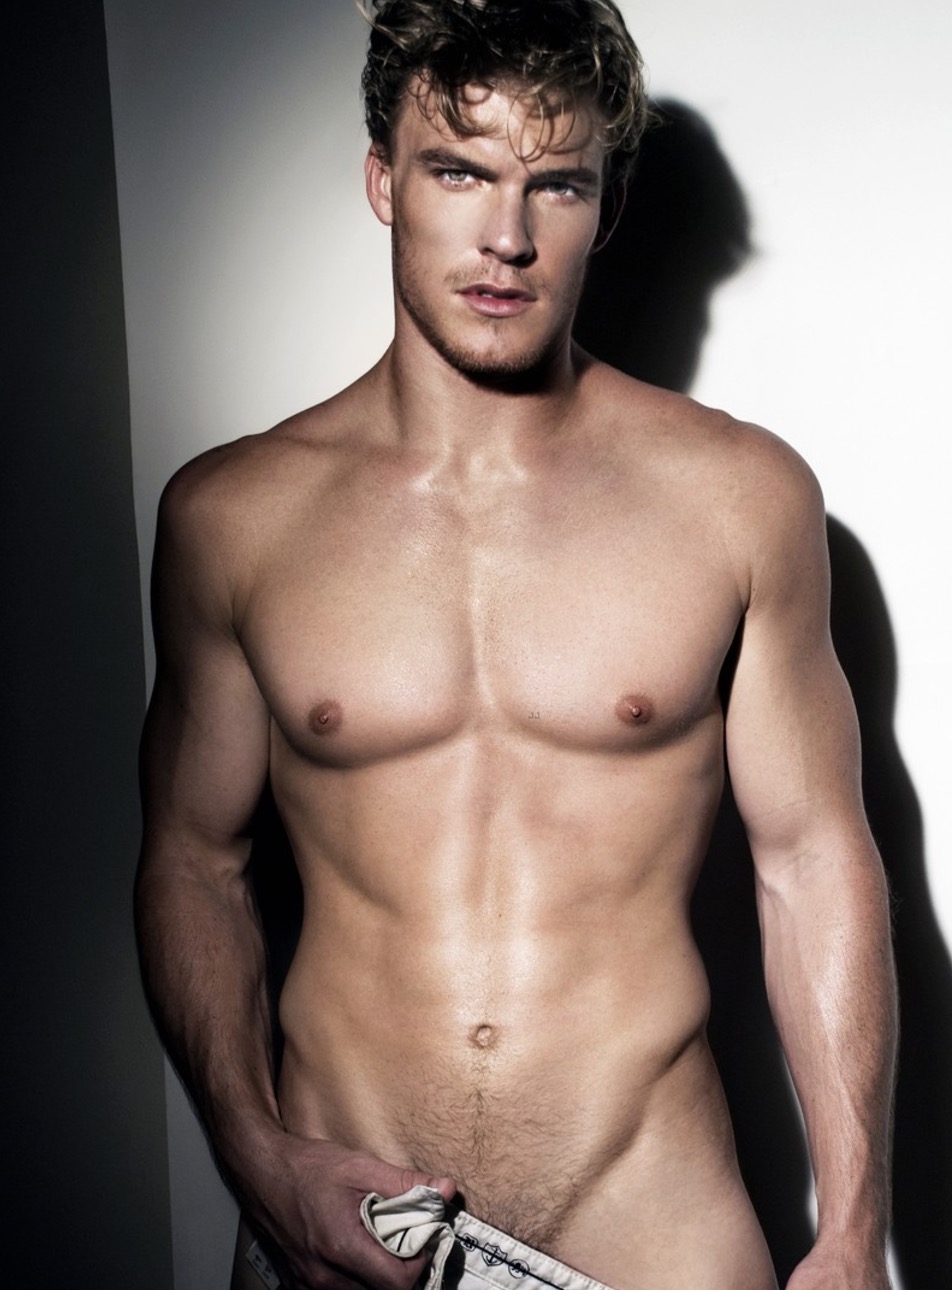 Big, blonde, Teutonic actor Alan Ritchson is in some new show where he show...